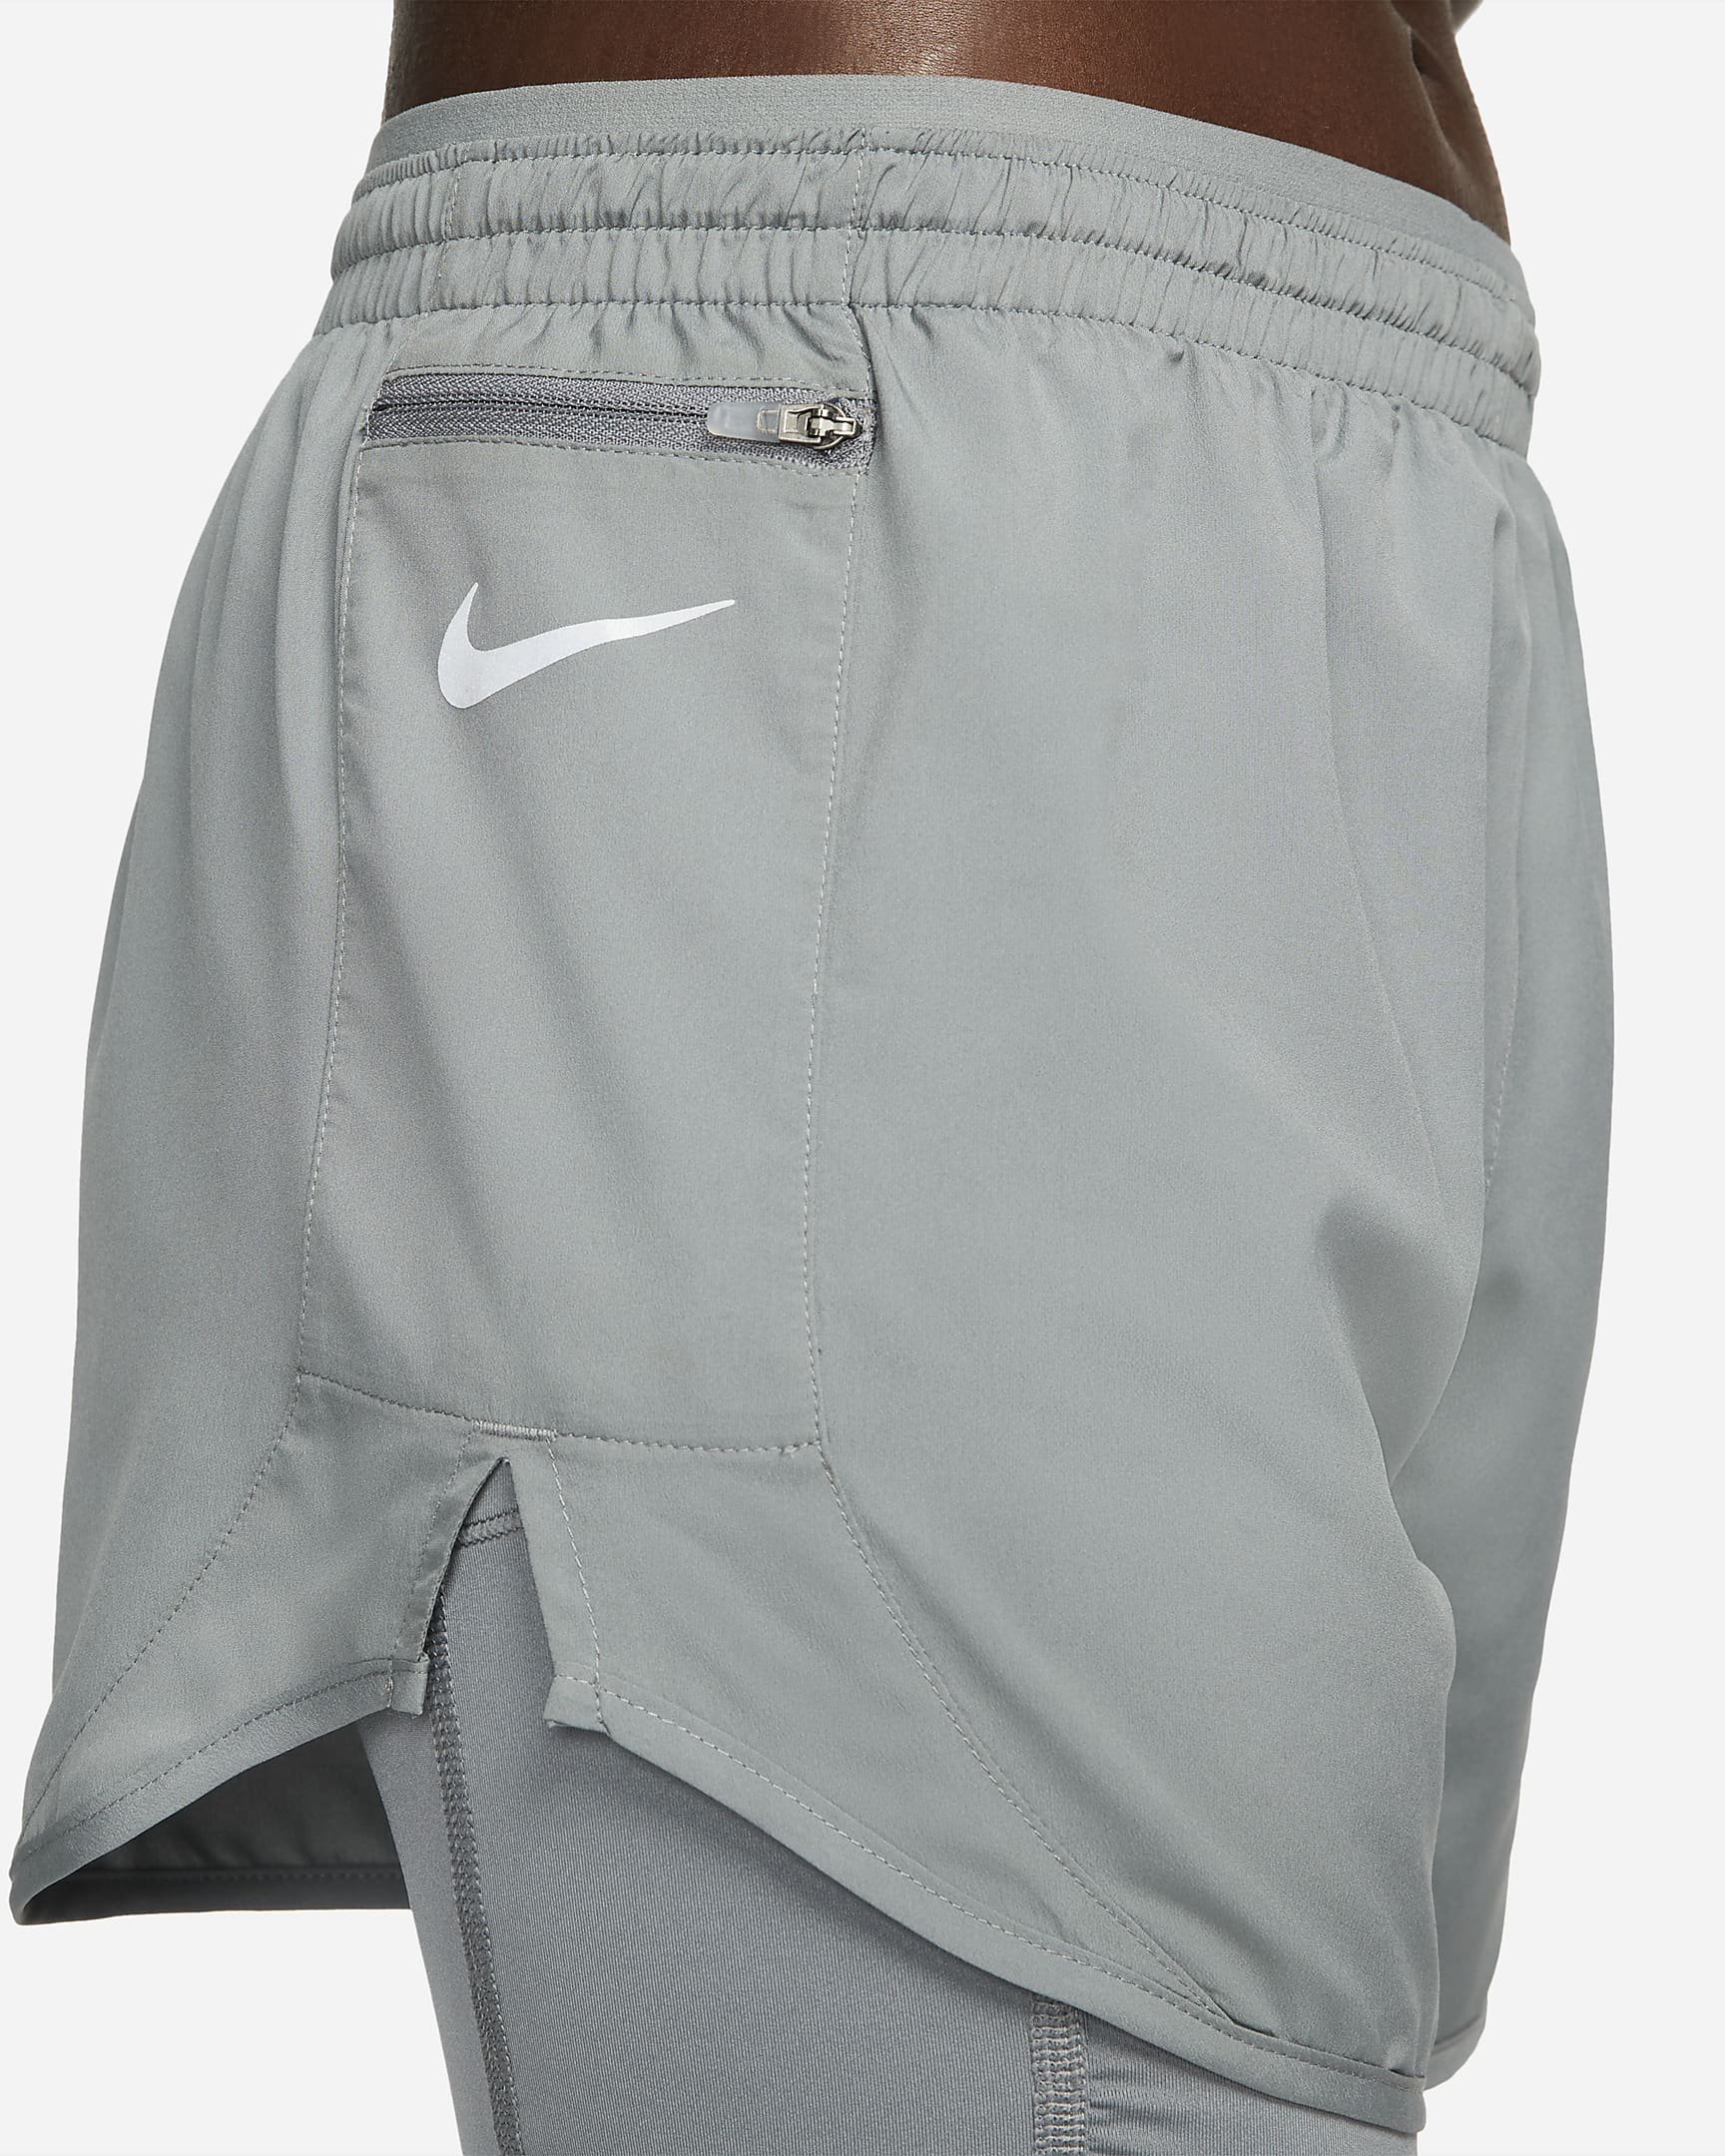 Nike Tempo Luxe Women's 2-In-1 Running Shorts. Nike SK